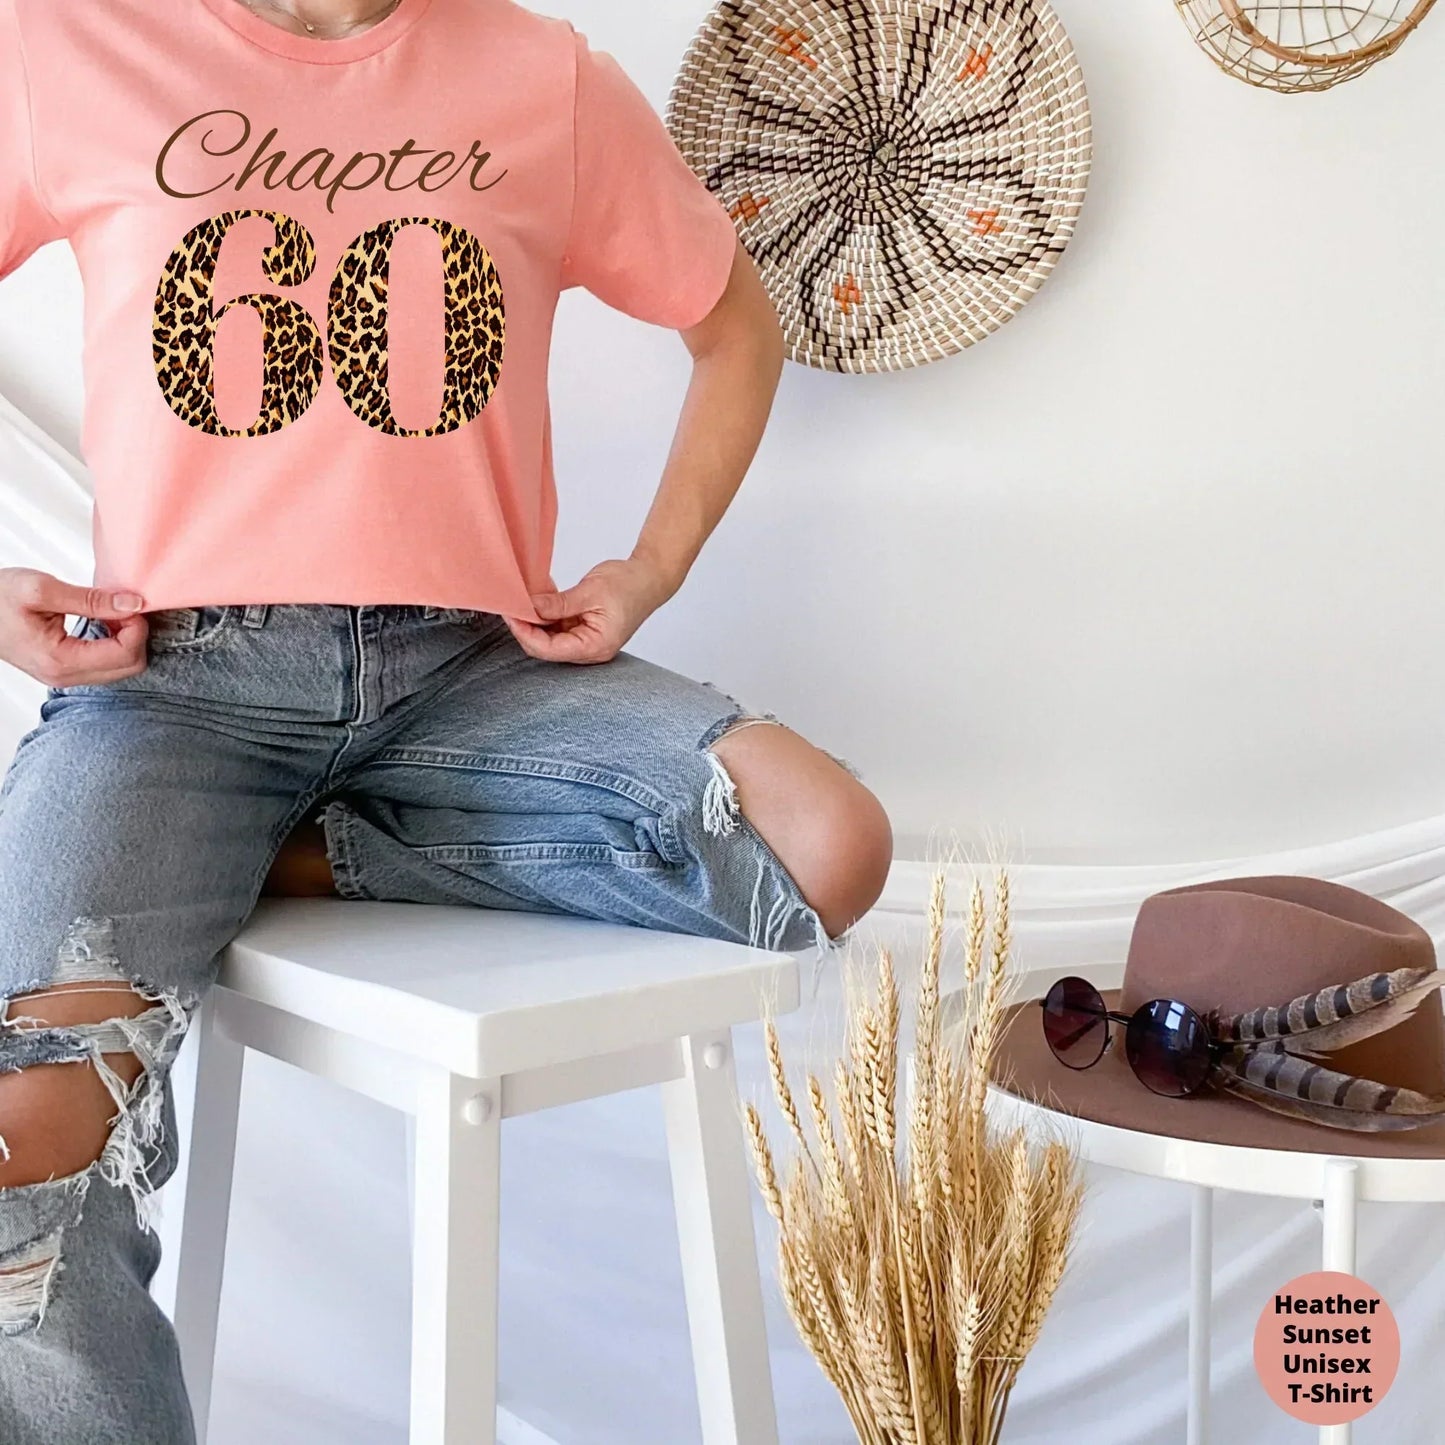 Chapter Sixty Birthday Shirt, Embrace Your Wisdom and Celebrate Your 60th Birthday with Style - Get Your Premium Birthday Shirt Today!